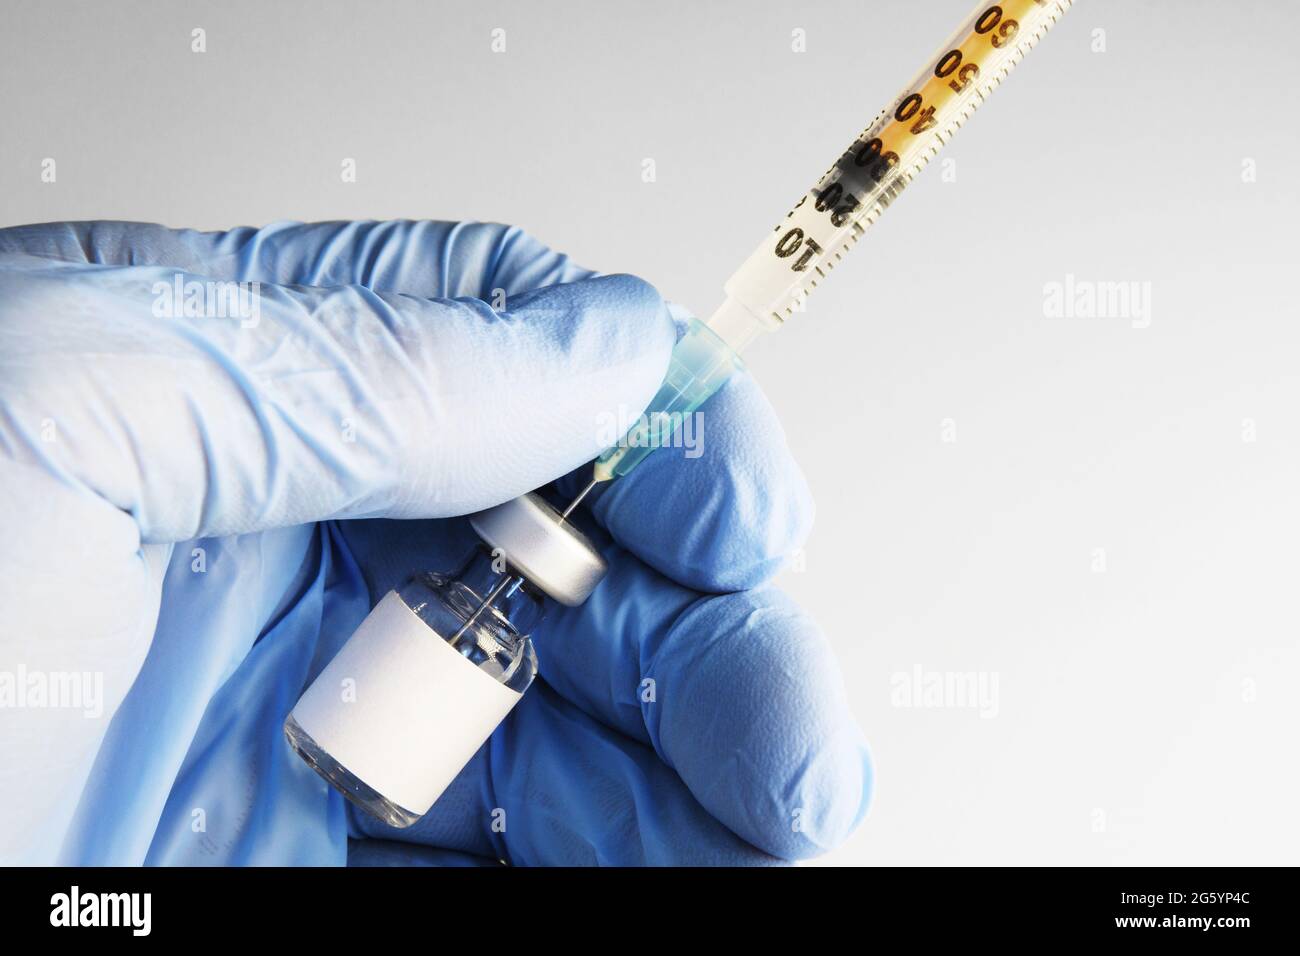 Close-up of vial with blank label in hand with nitrile glove. Fluid being transferred to syringe for injection. Healthcare, medicine, pharmacy and vac Stock Photo